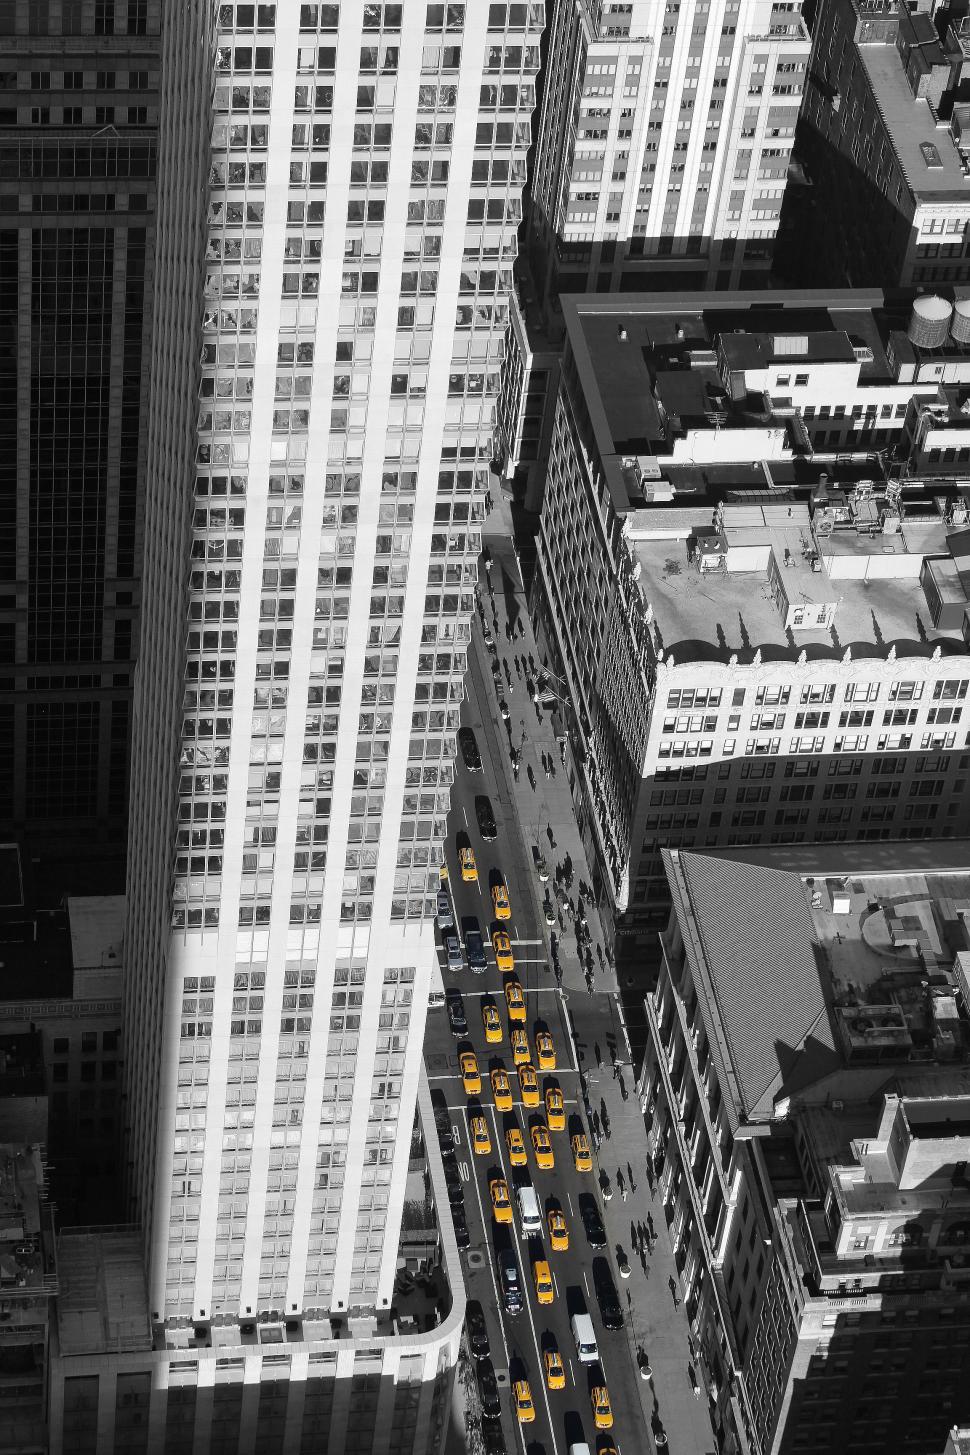 Free Image of Skyscrapers and road with taxis from above 